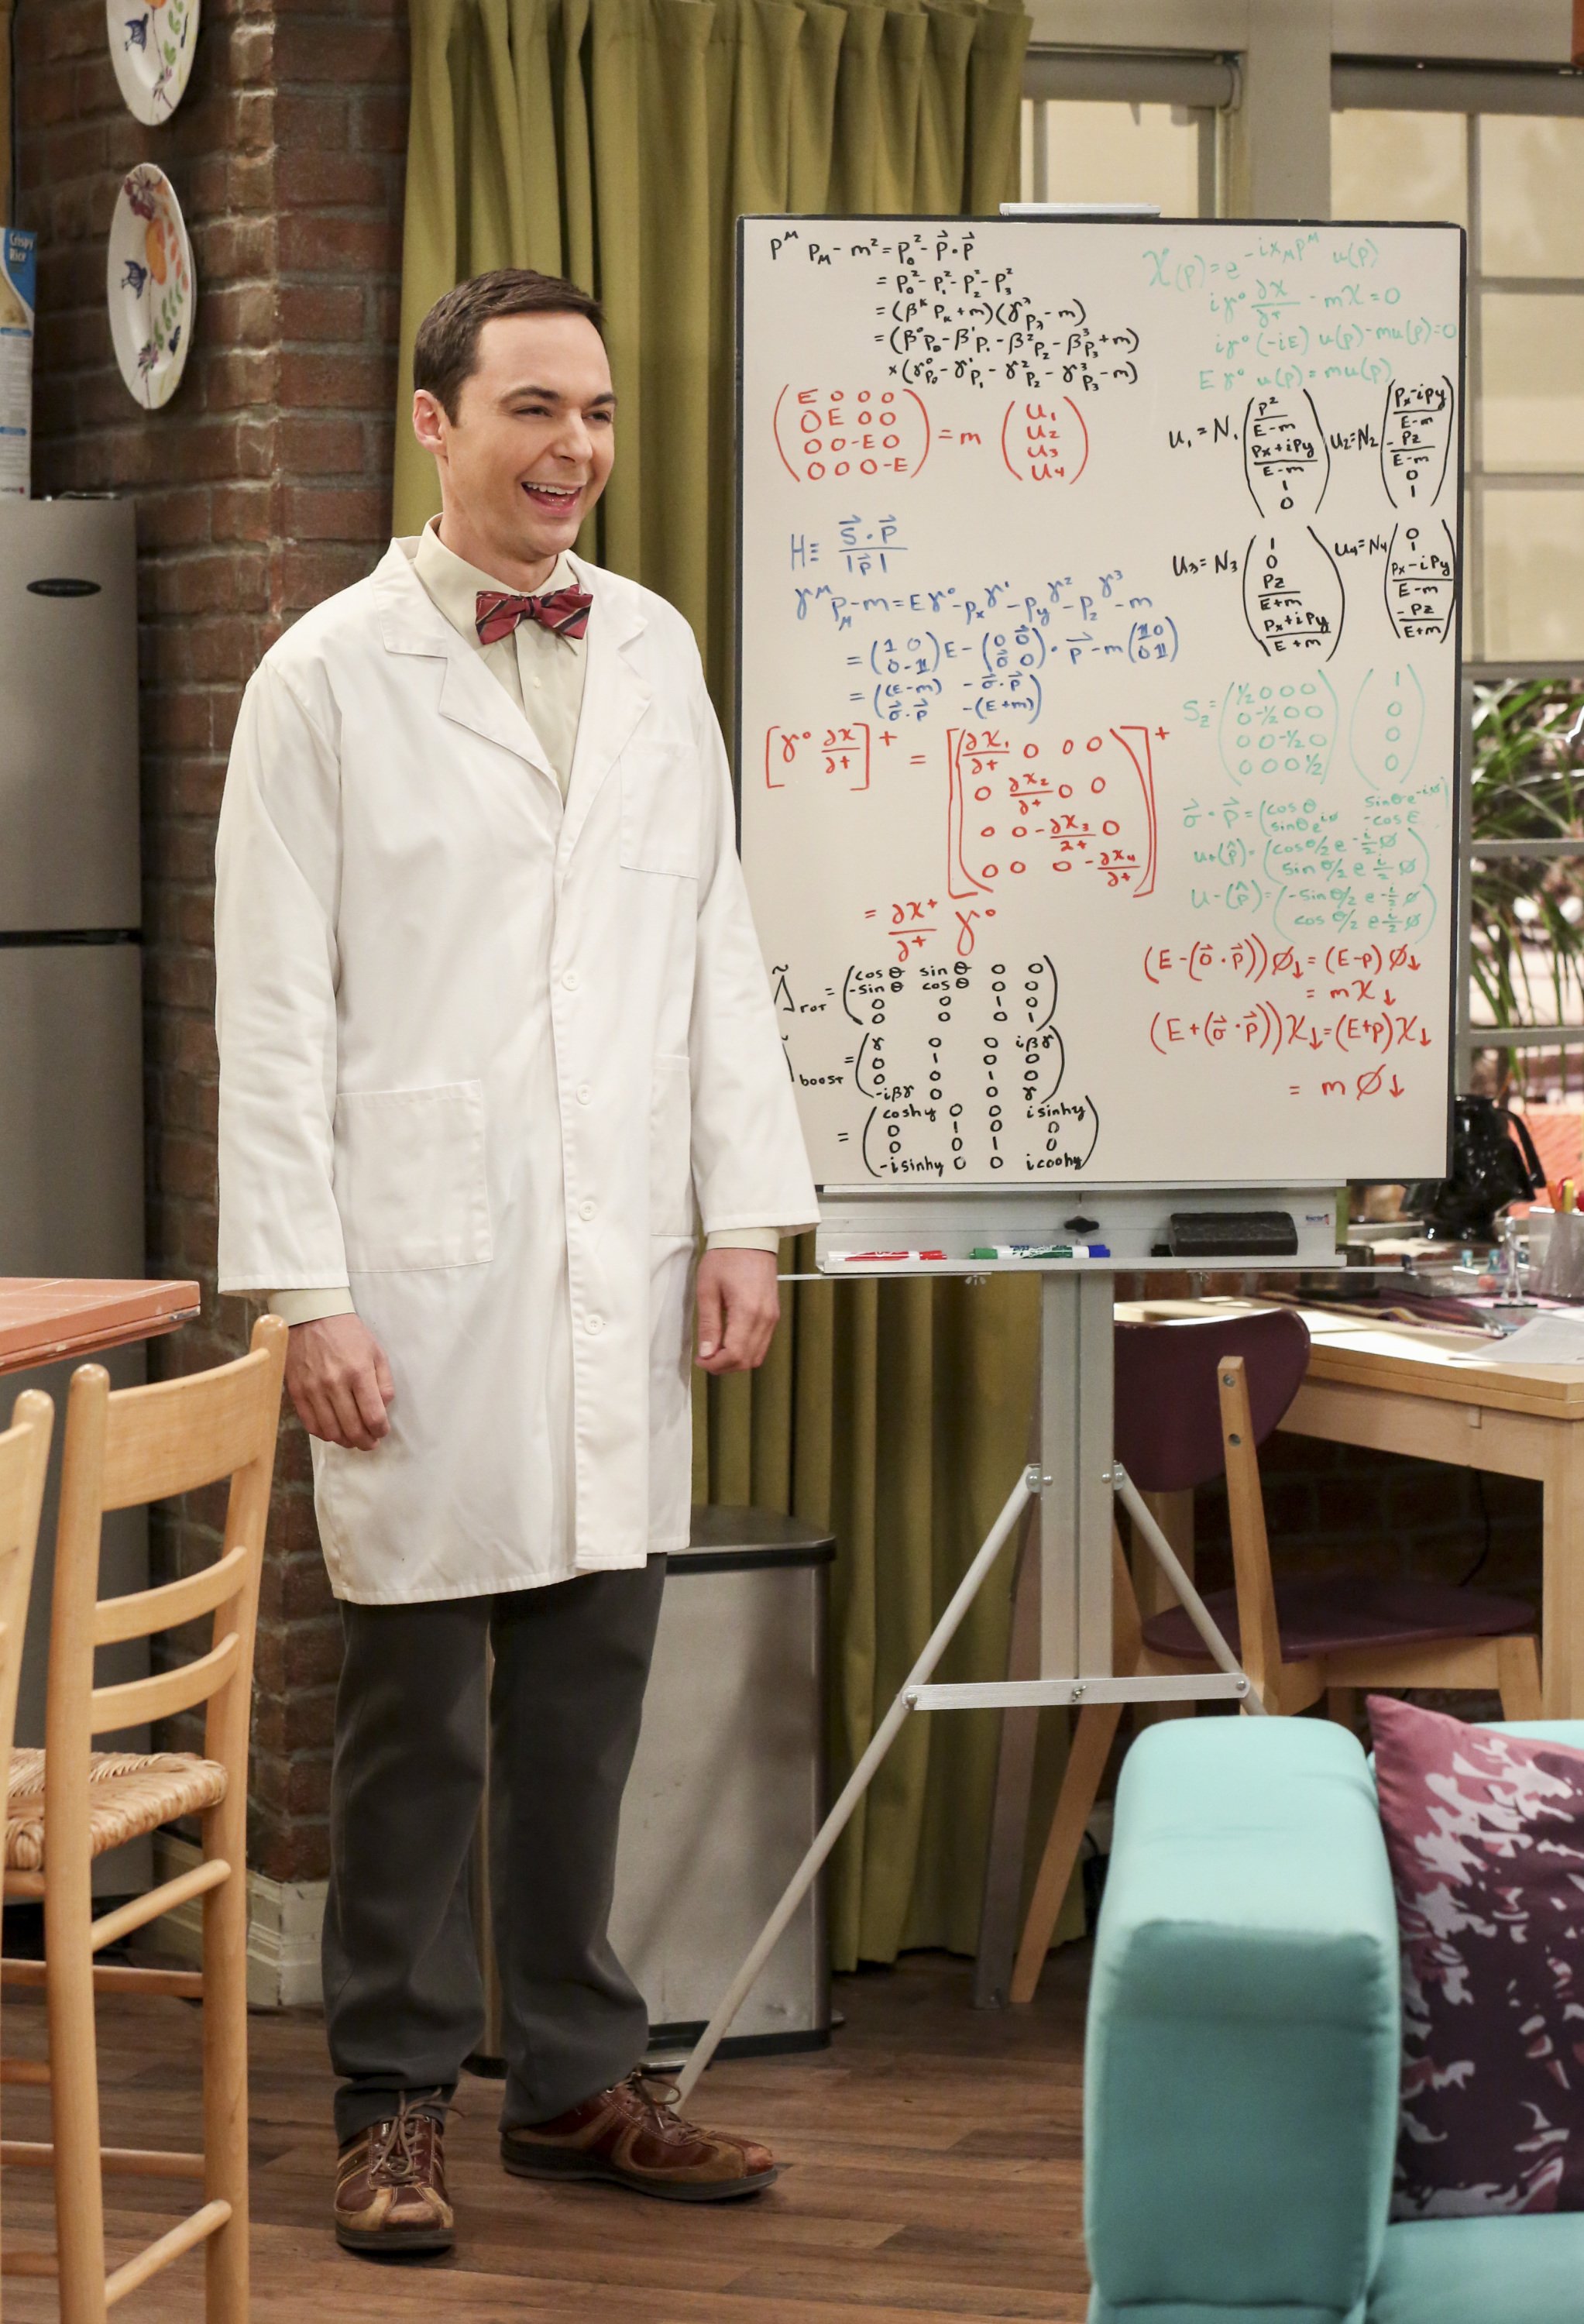 Jim Parsons as Sheldon Cooper stands next to his whiteboard